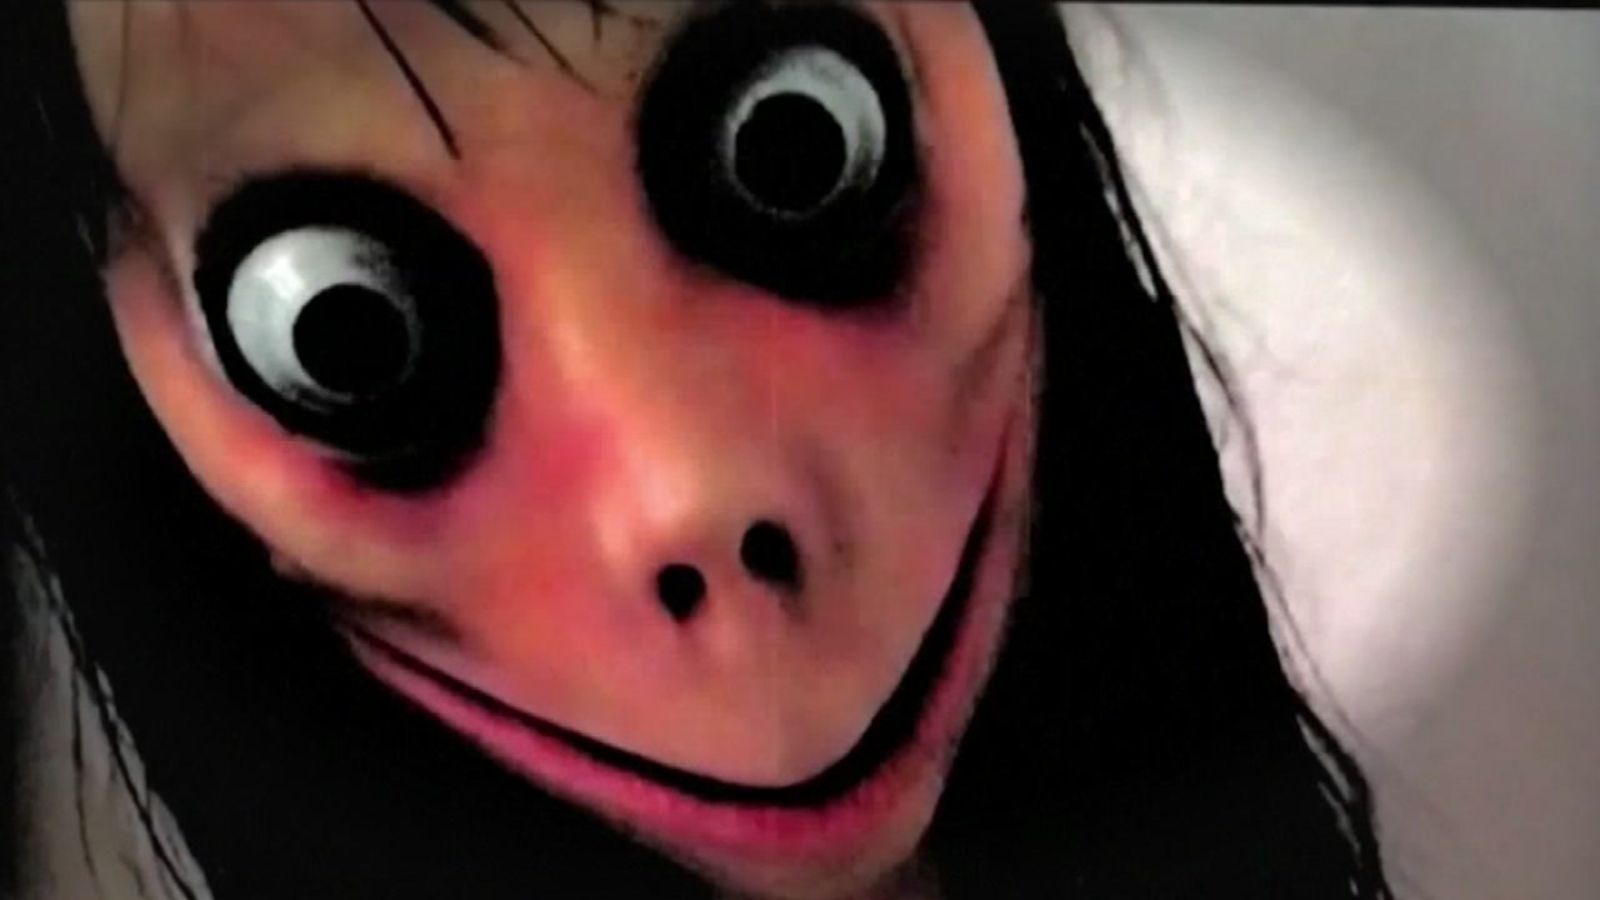 Momo Challenge isn't real: How parents can deal with internet hoaxes